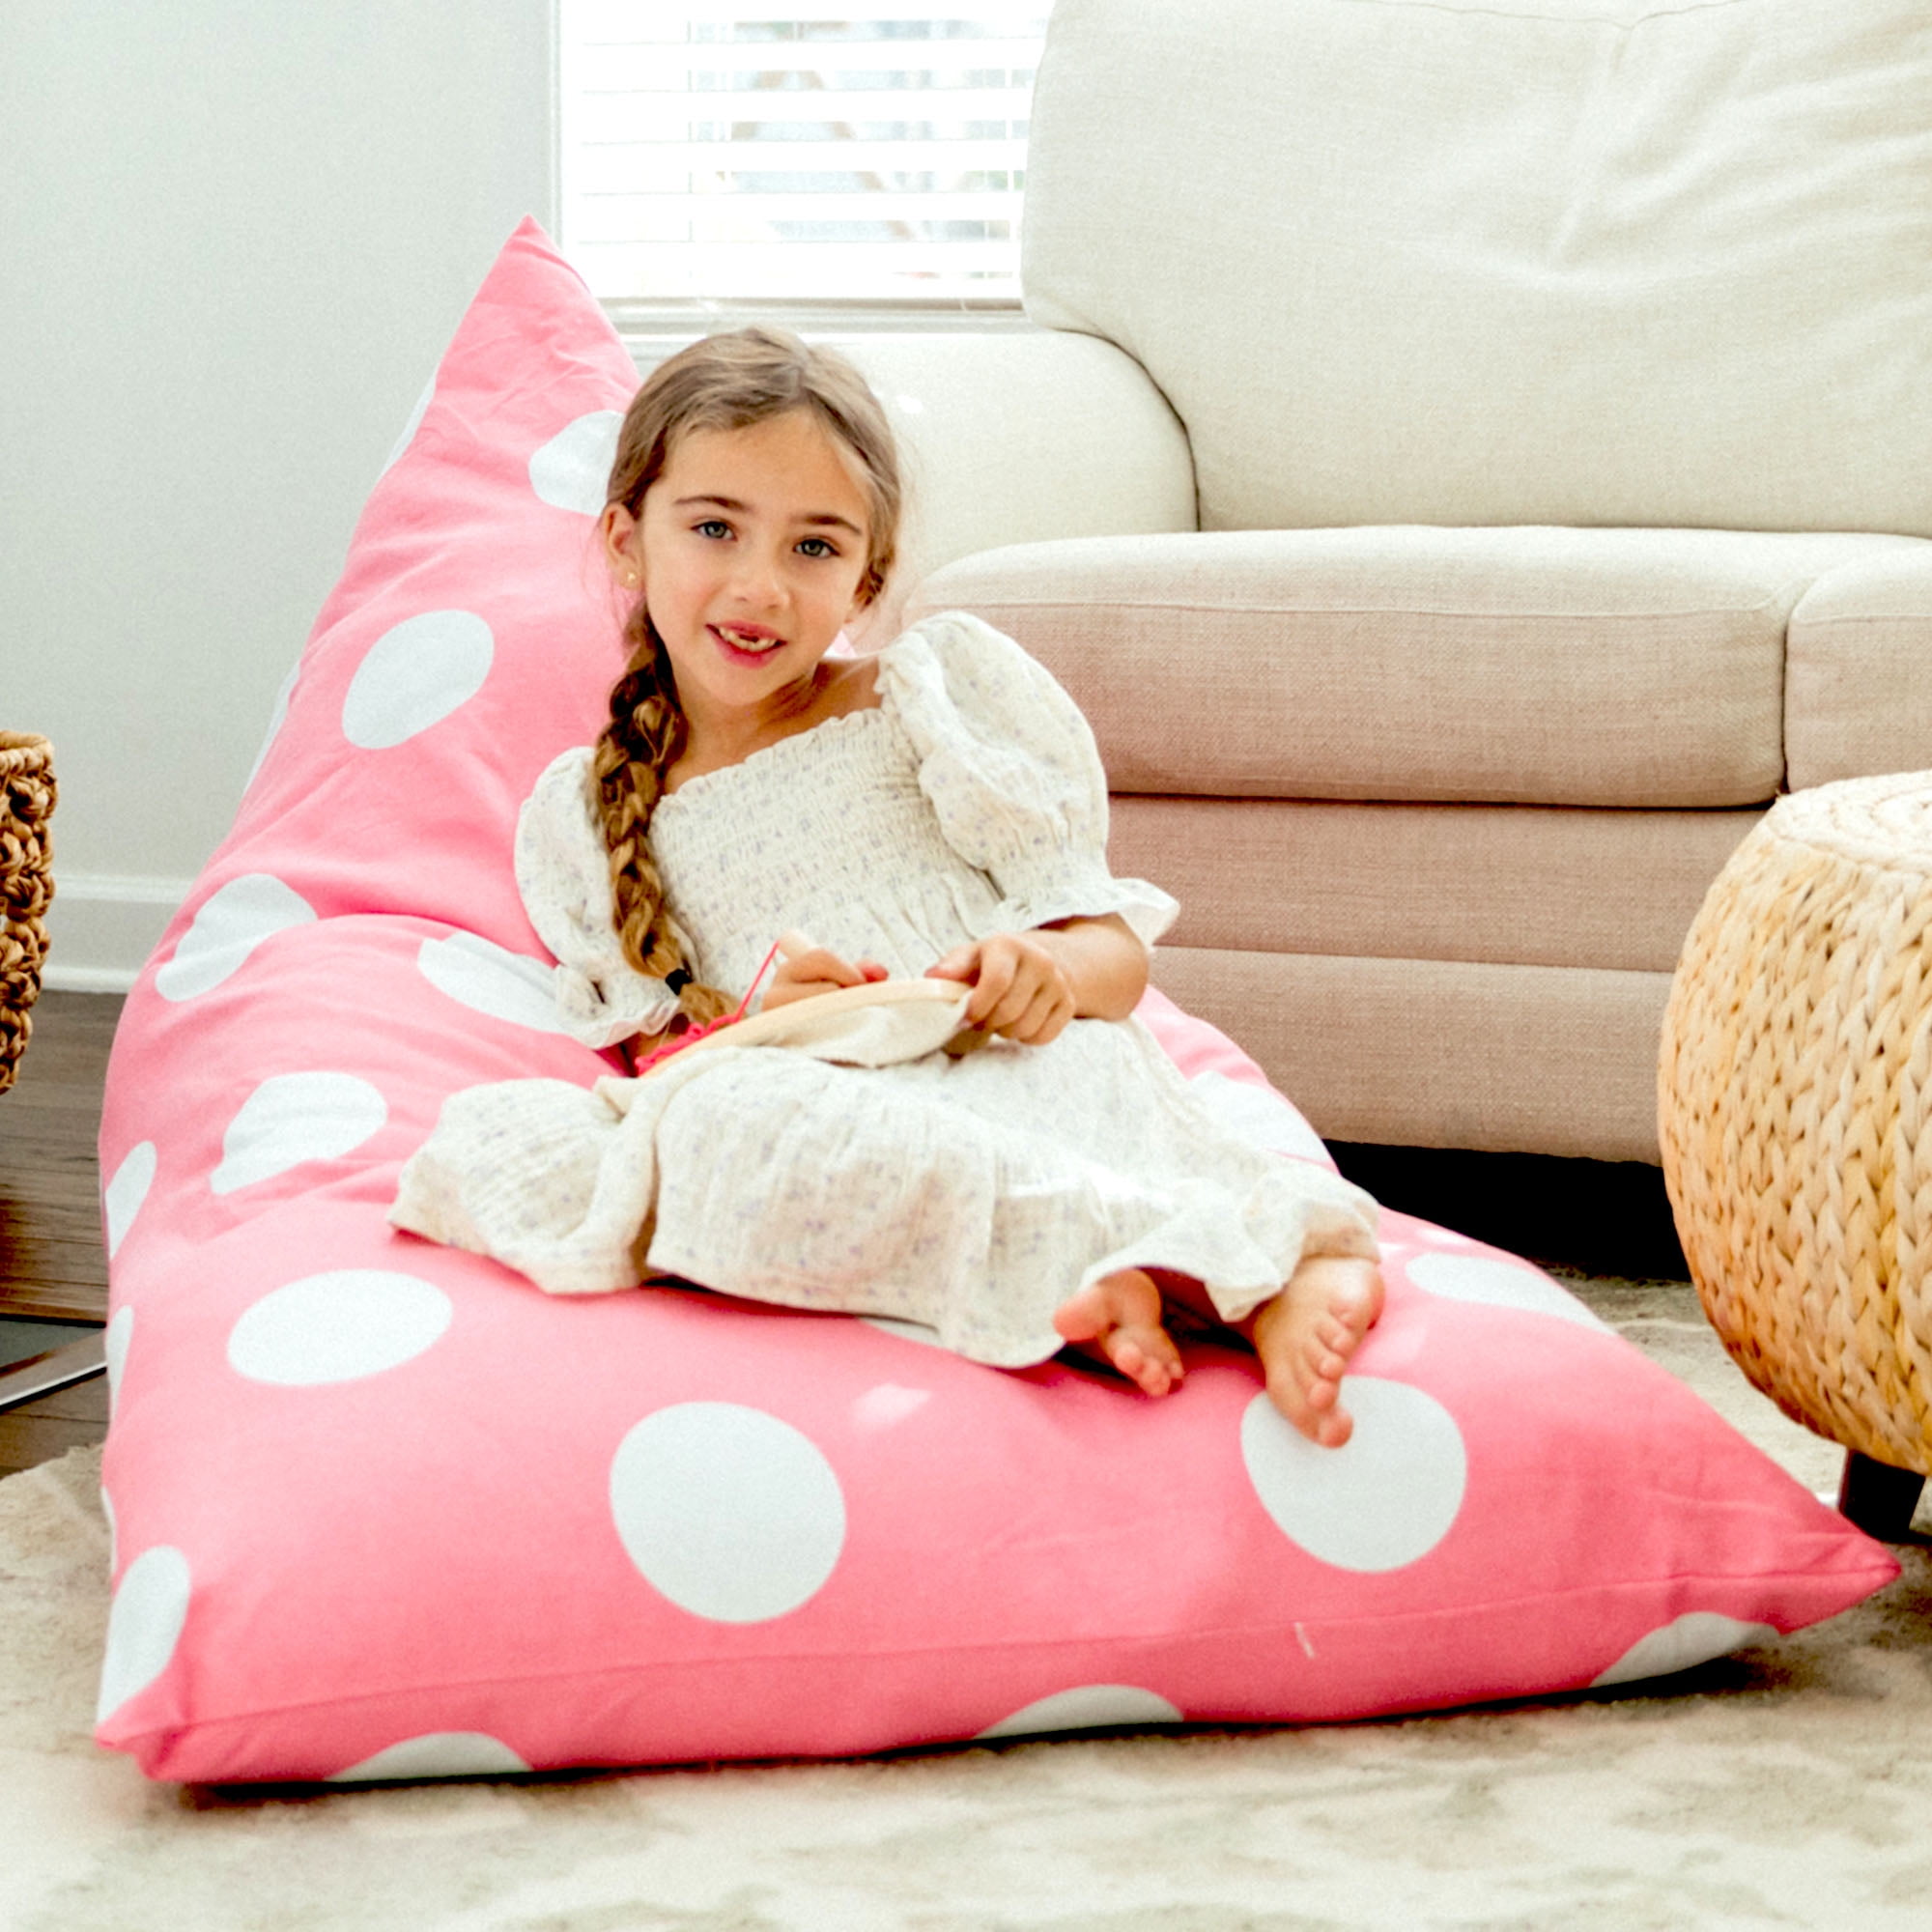 Butterfly Craze Bean Bag Chair Cover - Toy Organizer, Fill With Stuffed  Animals, Comfy Floor Lounger - Stuffing Not Included, Pink Polka Dots :  Target